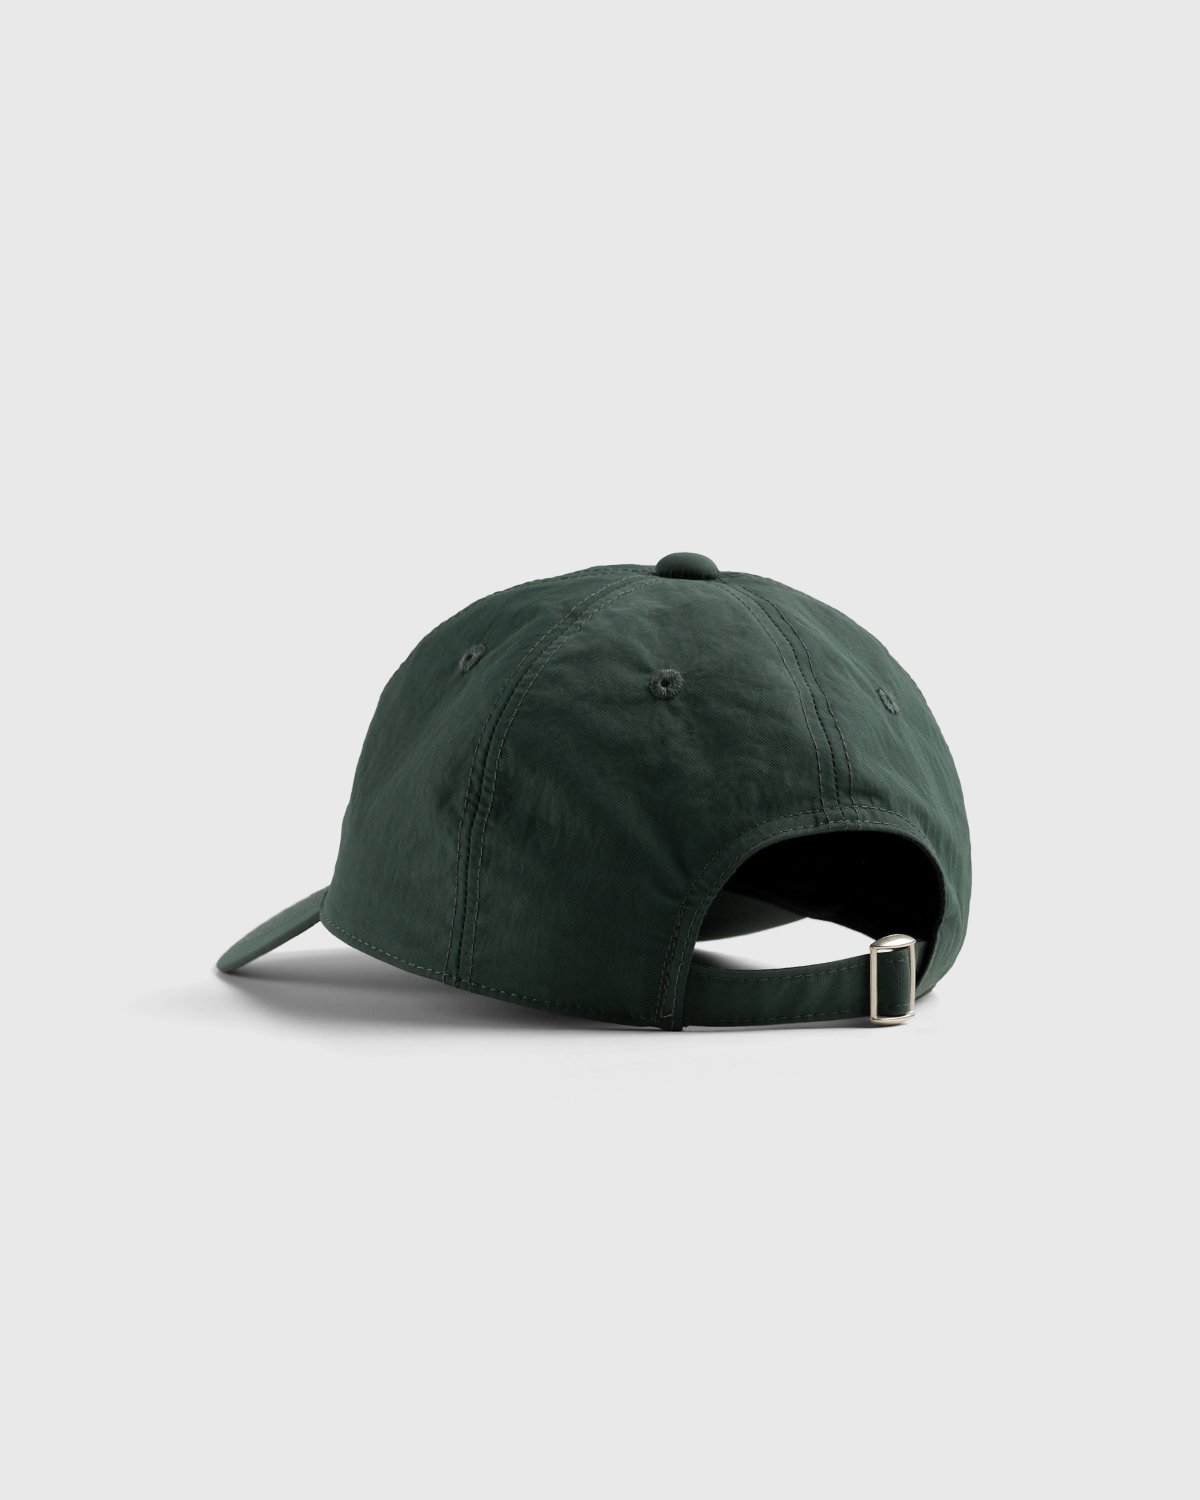 Highsnobiety - Brushed Nylon Ball Cap Green - Accessories - Green - Image 3